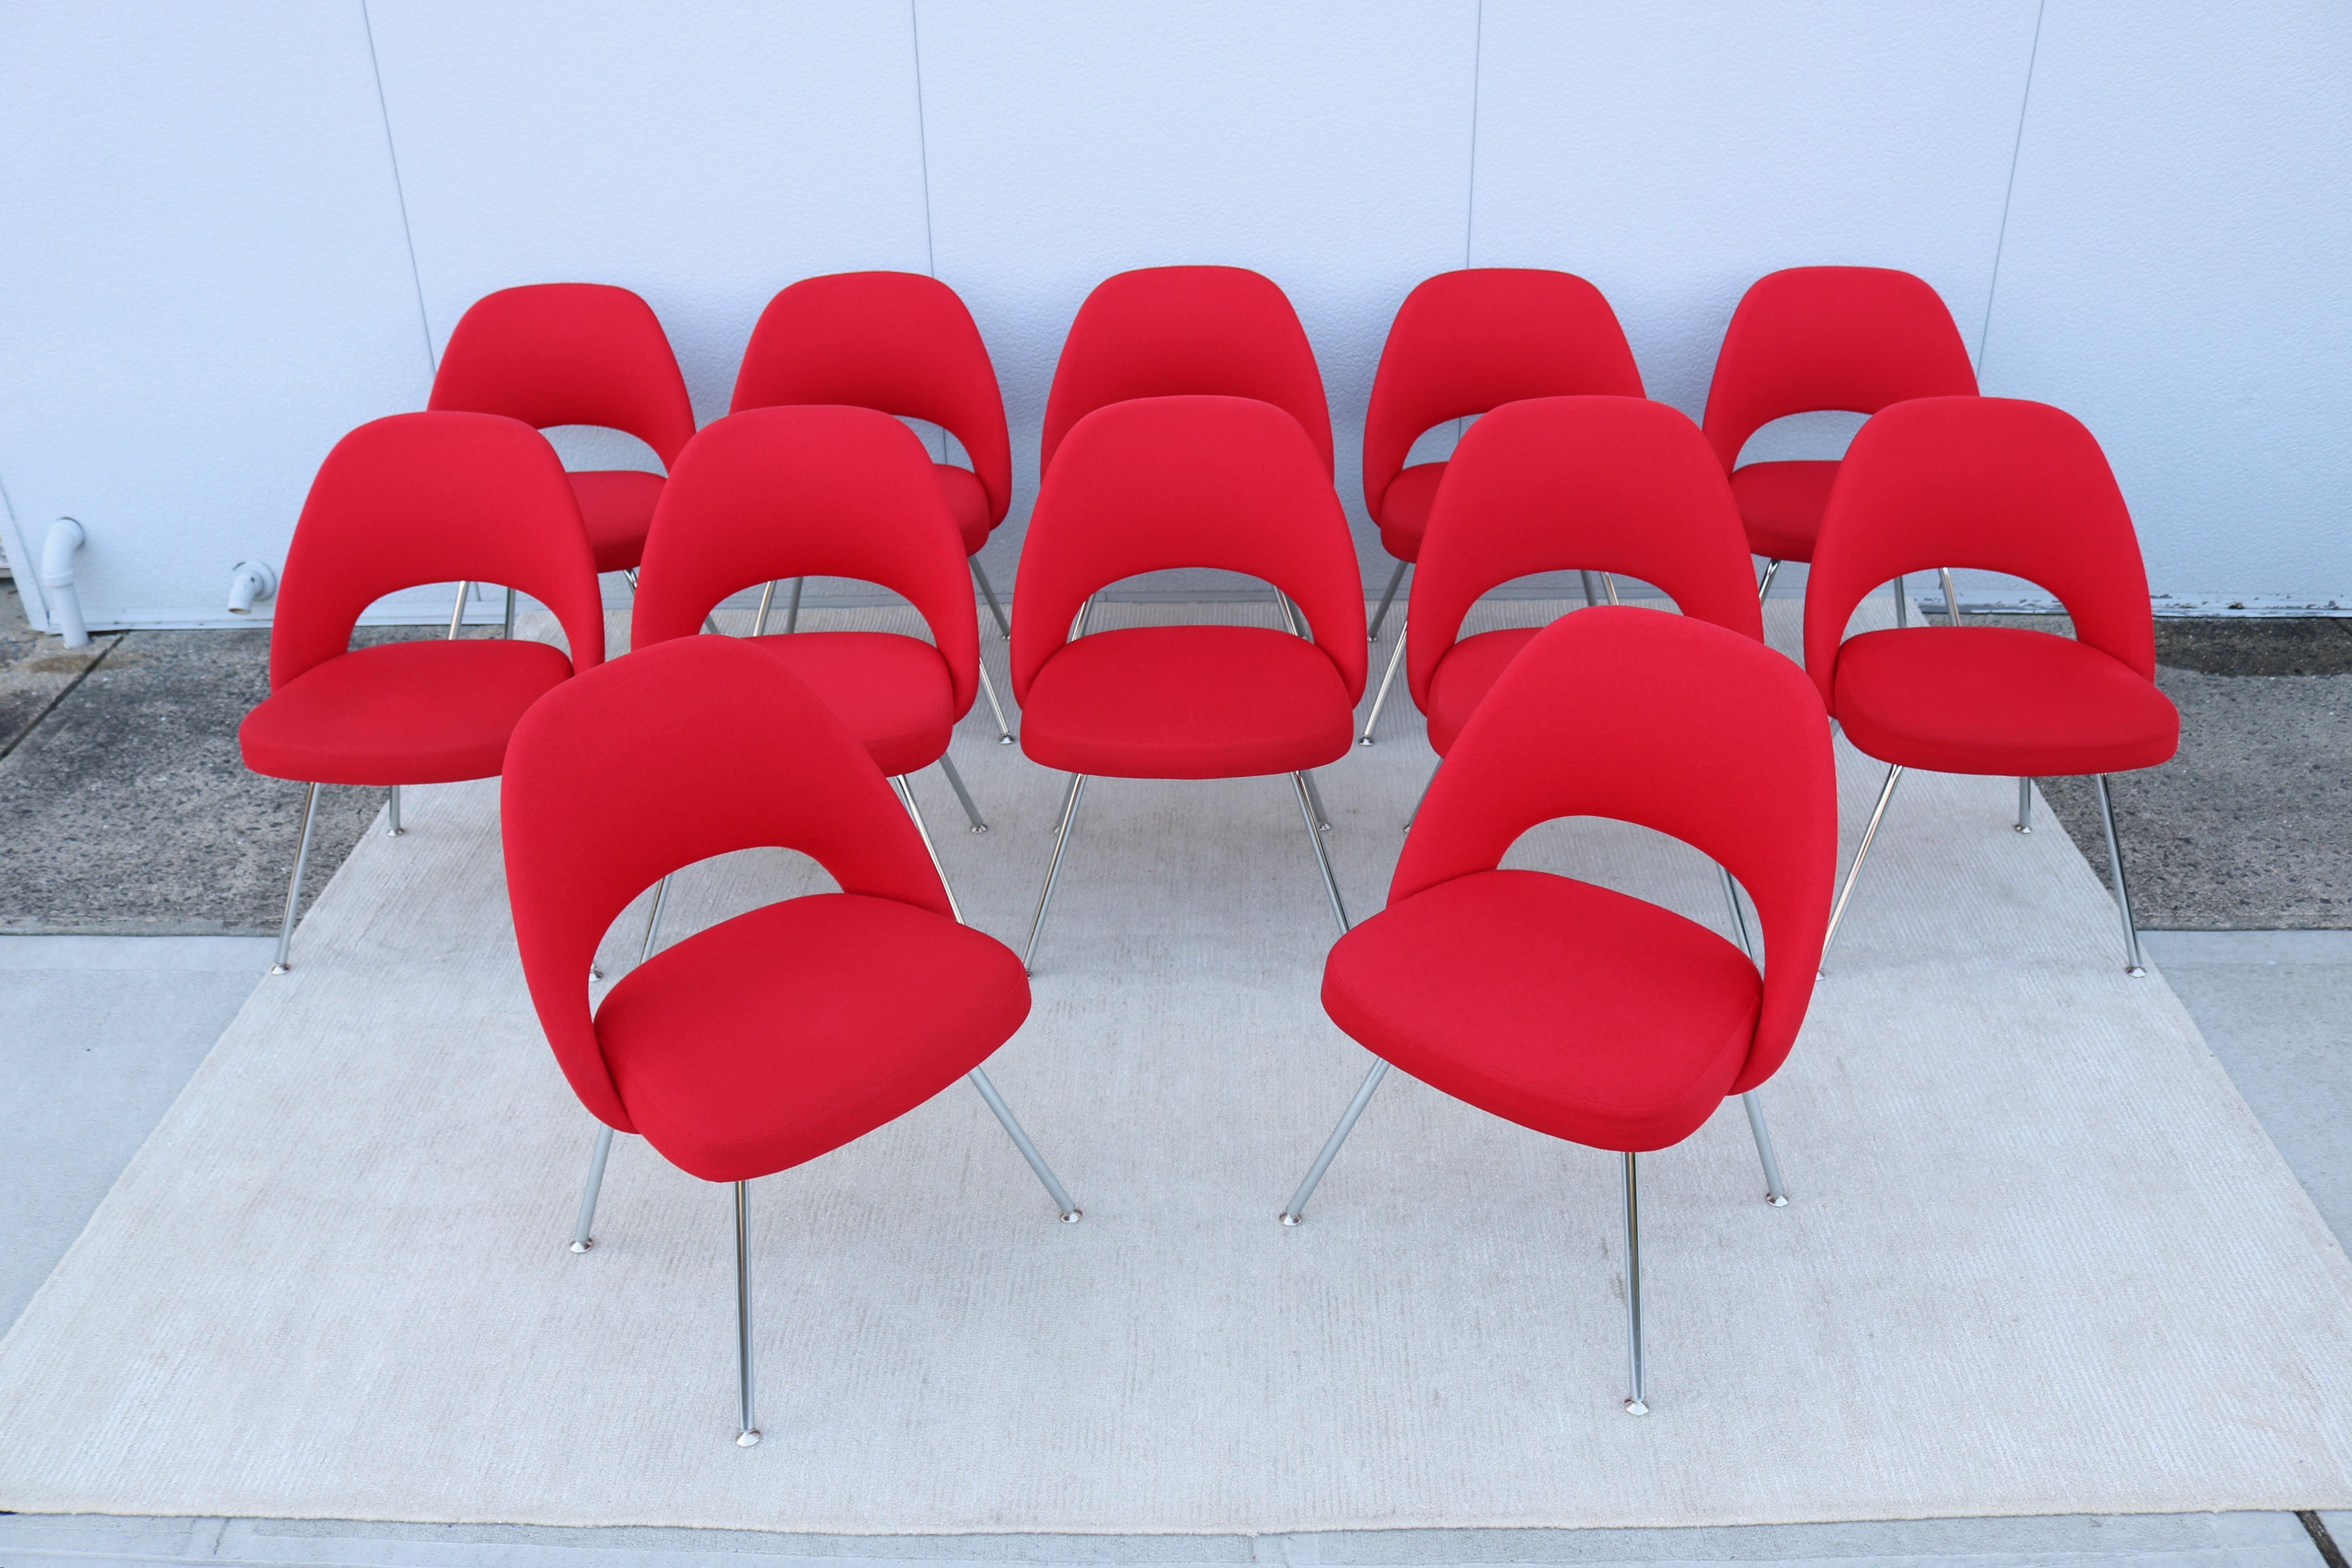 Polished Mid-Century Modern Eero Saarinen Knoll Red Executive Armless Chairs - Set of 12 For Sale